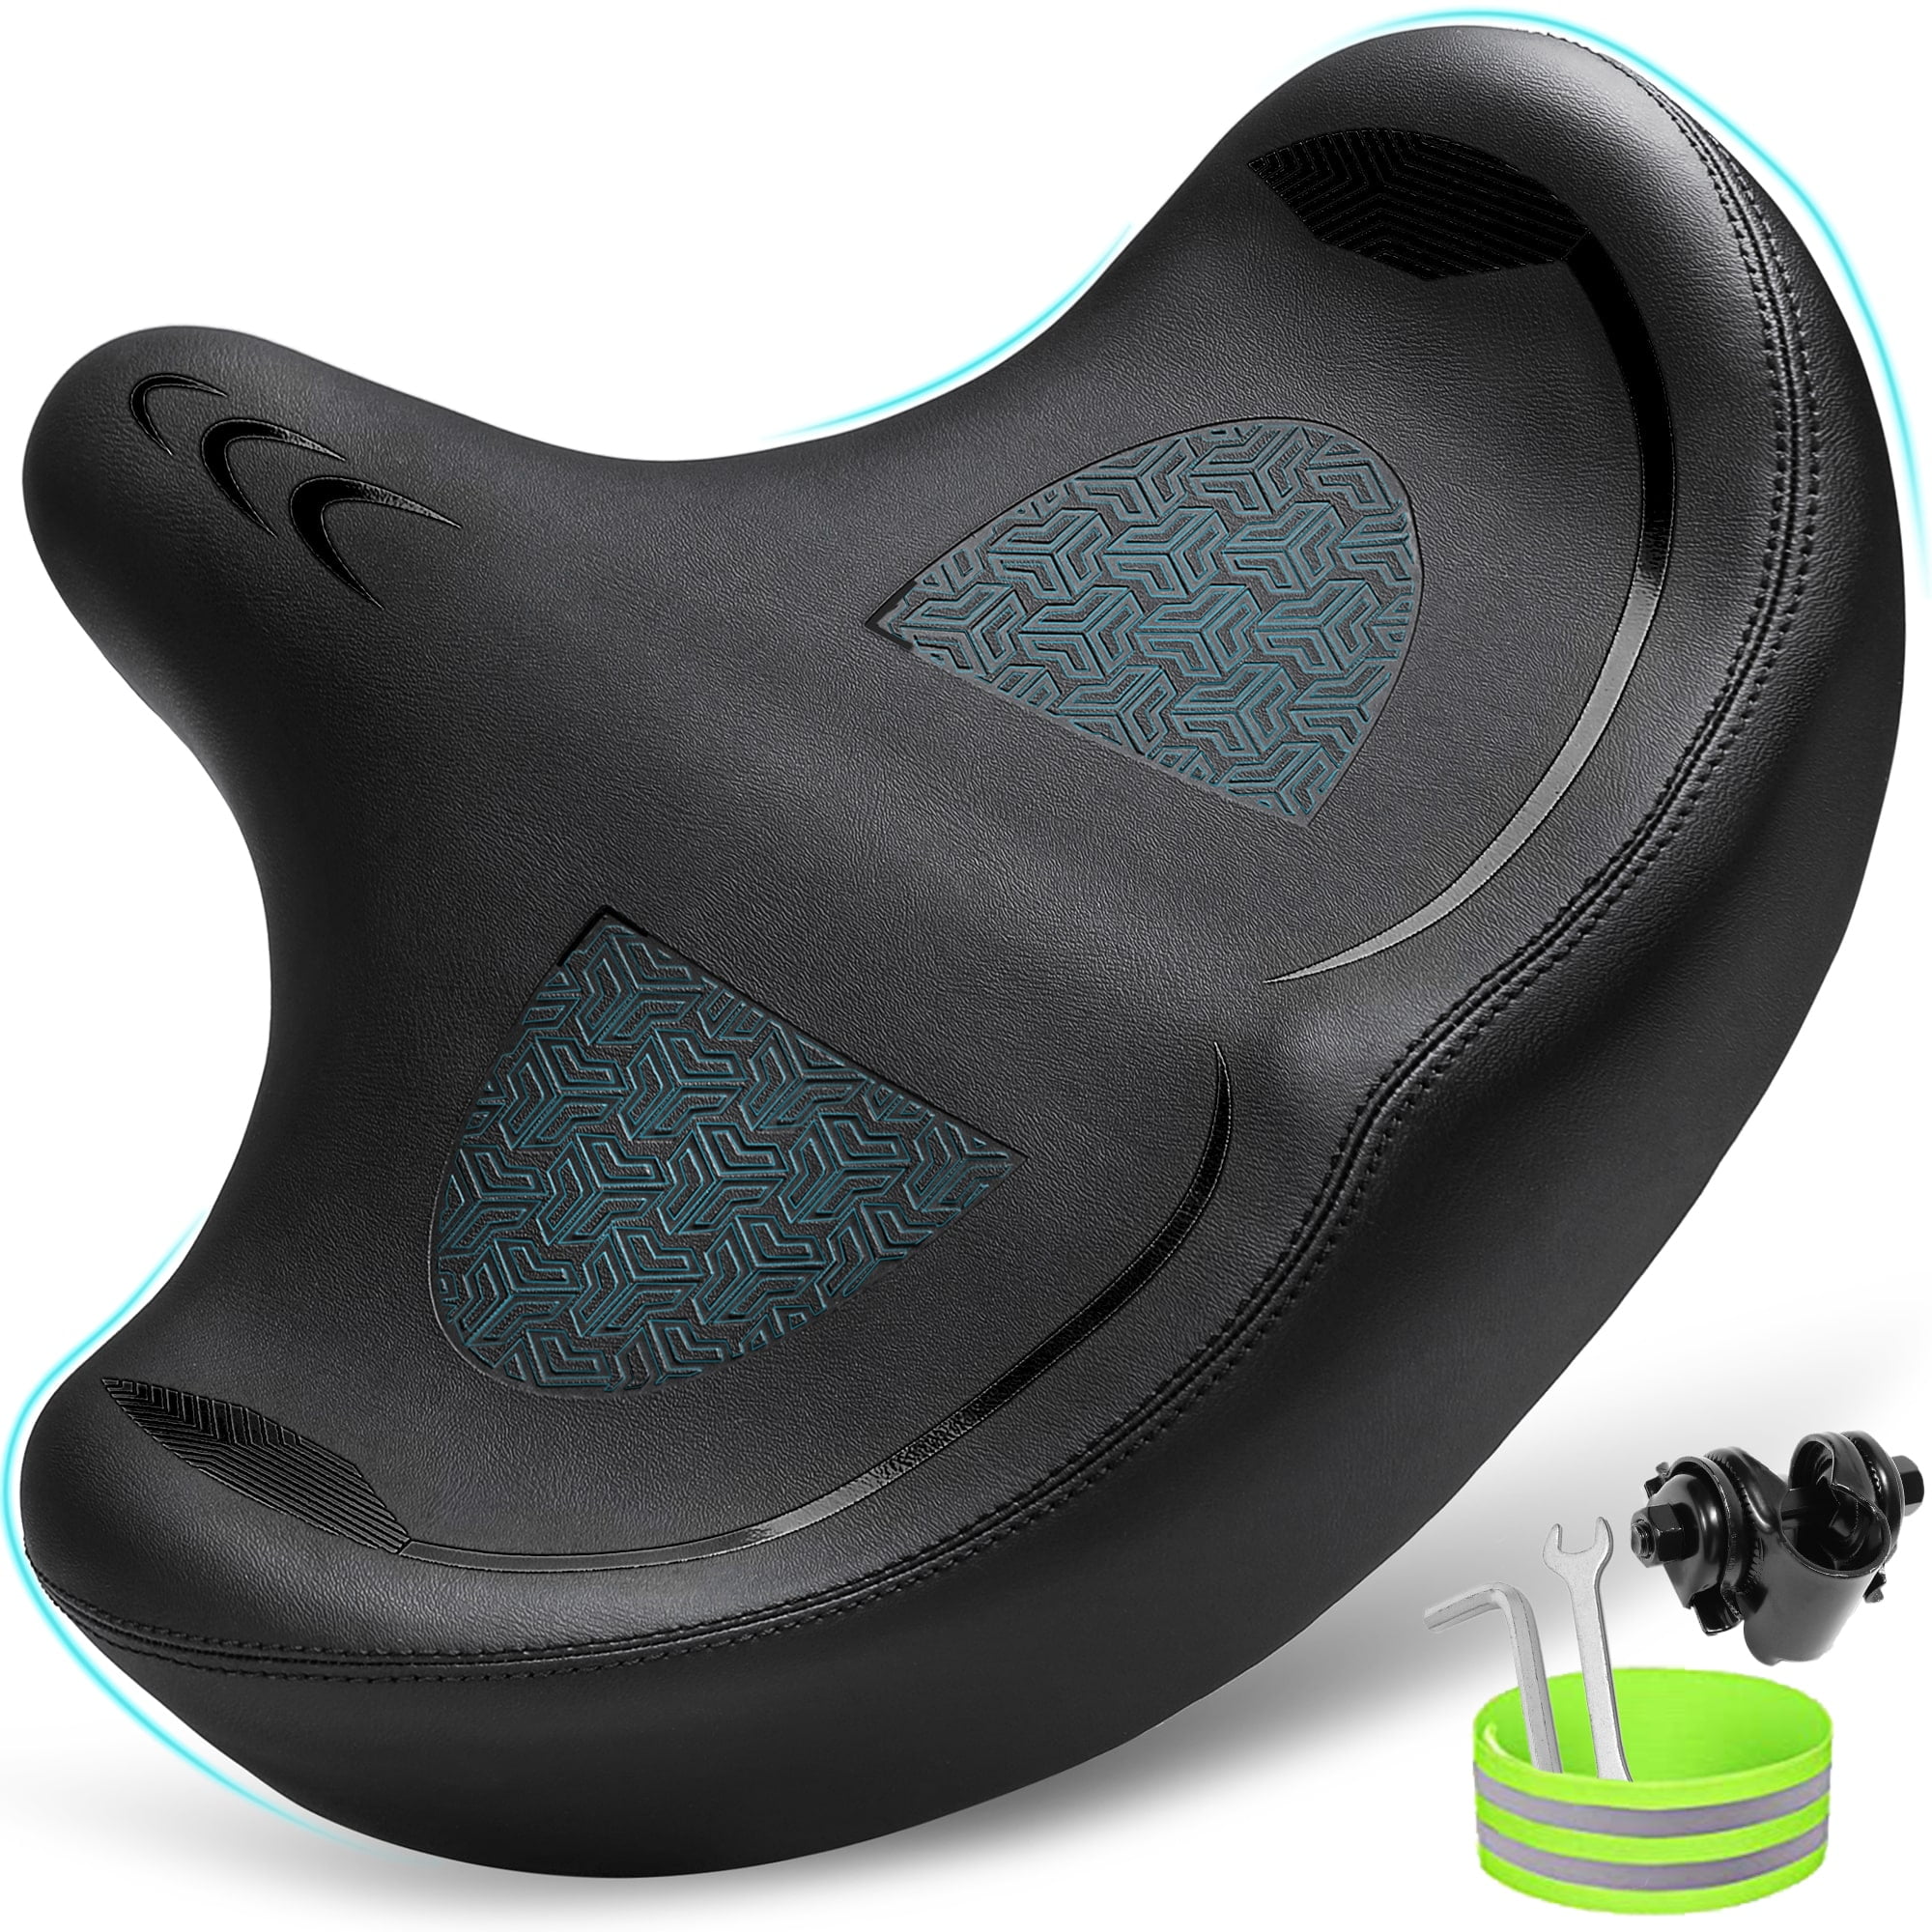 YBEKI Wide Exercise Bike Seat Cover - Comfortable Bicycle Saddle Cushion Is Filled with Gel and High Density Foam to Make It More Elastic and Soft